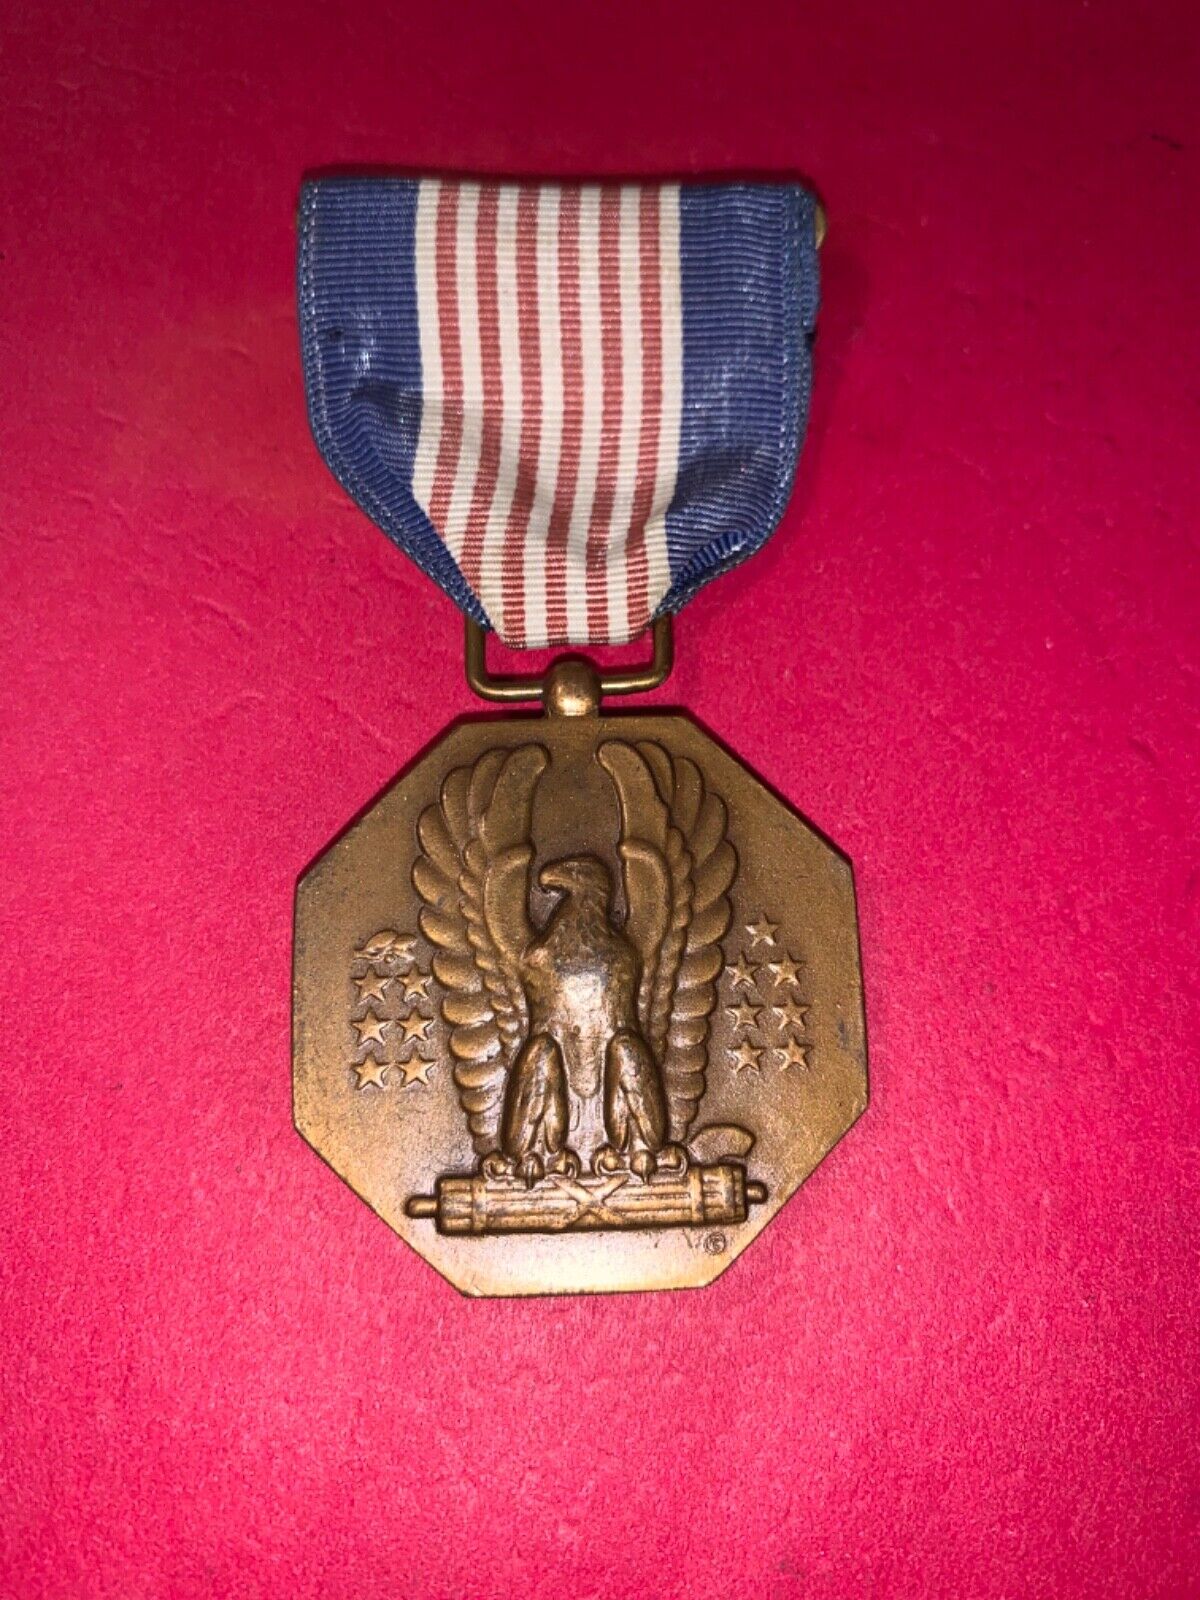 US WWII SOLDIERS MEDAL GOOD OVERALL AGE PATINA ARMY MILITARY AWARD DECORATION US